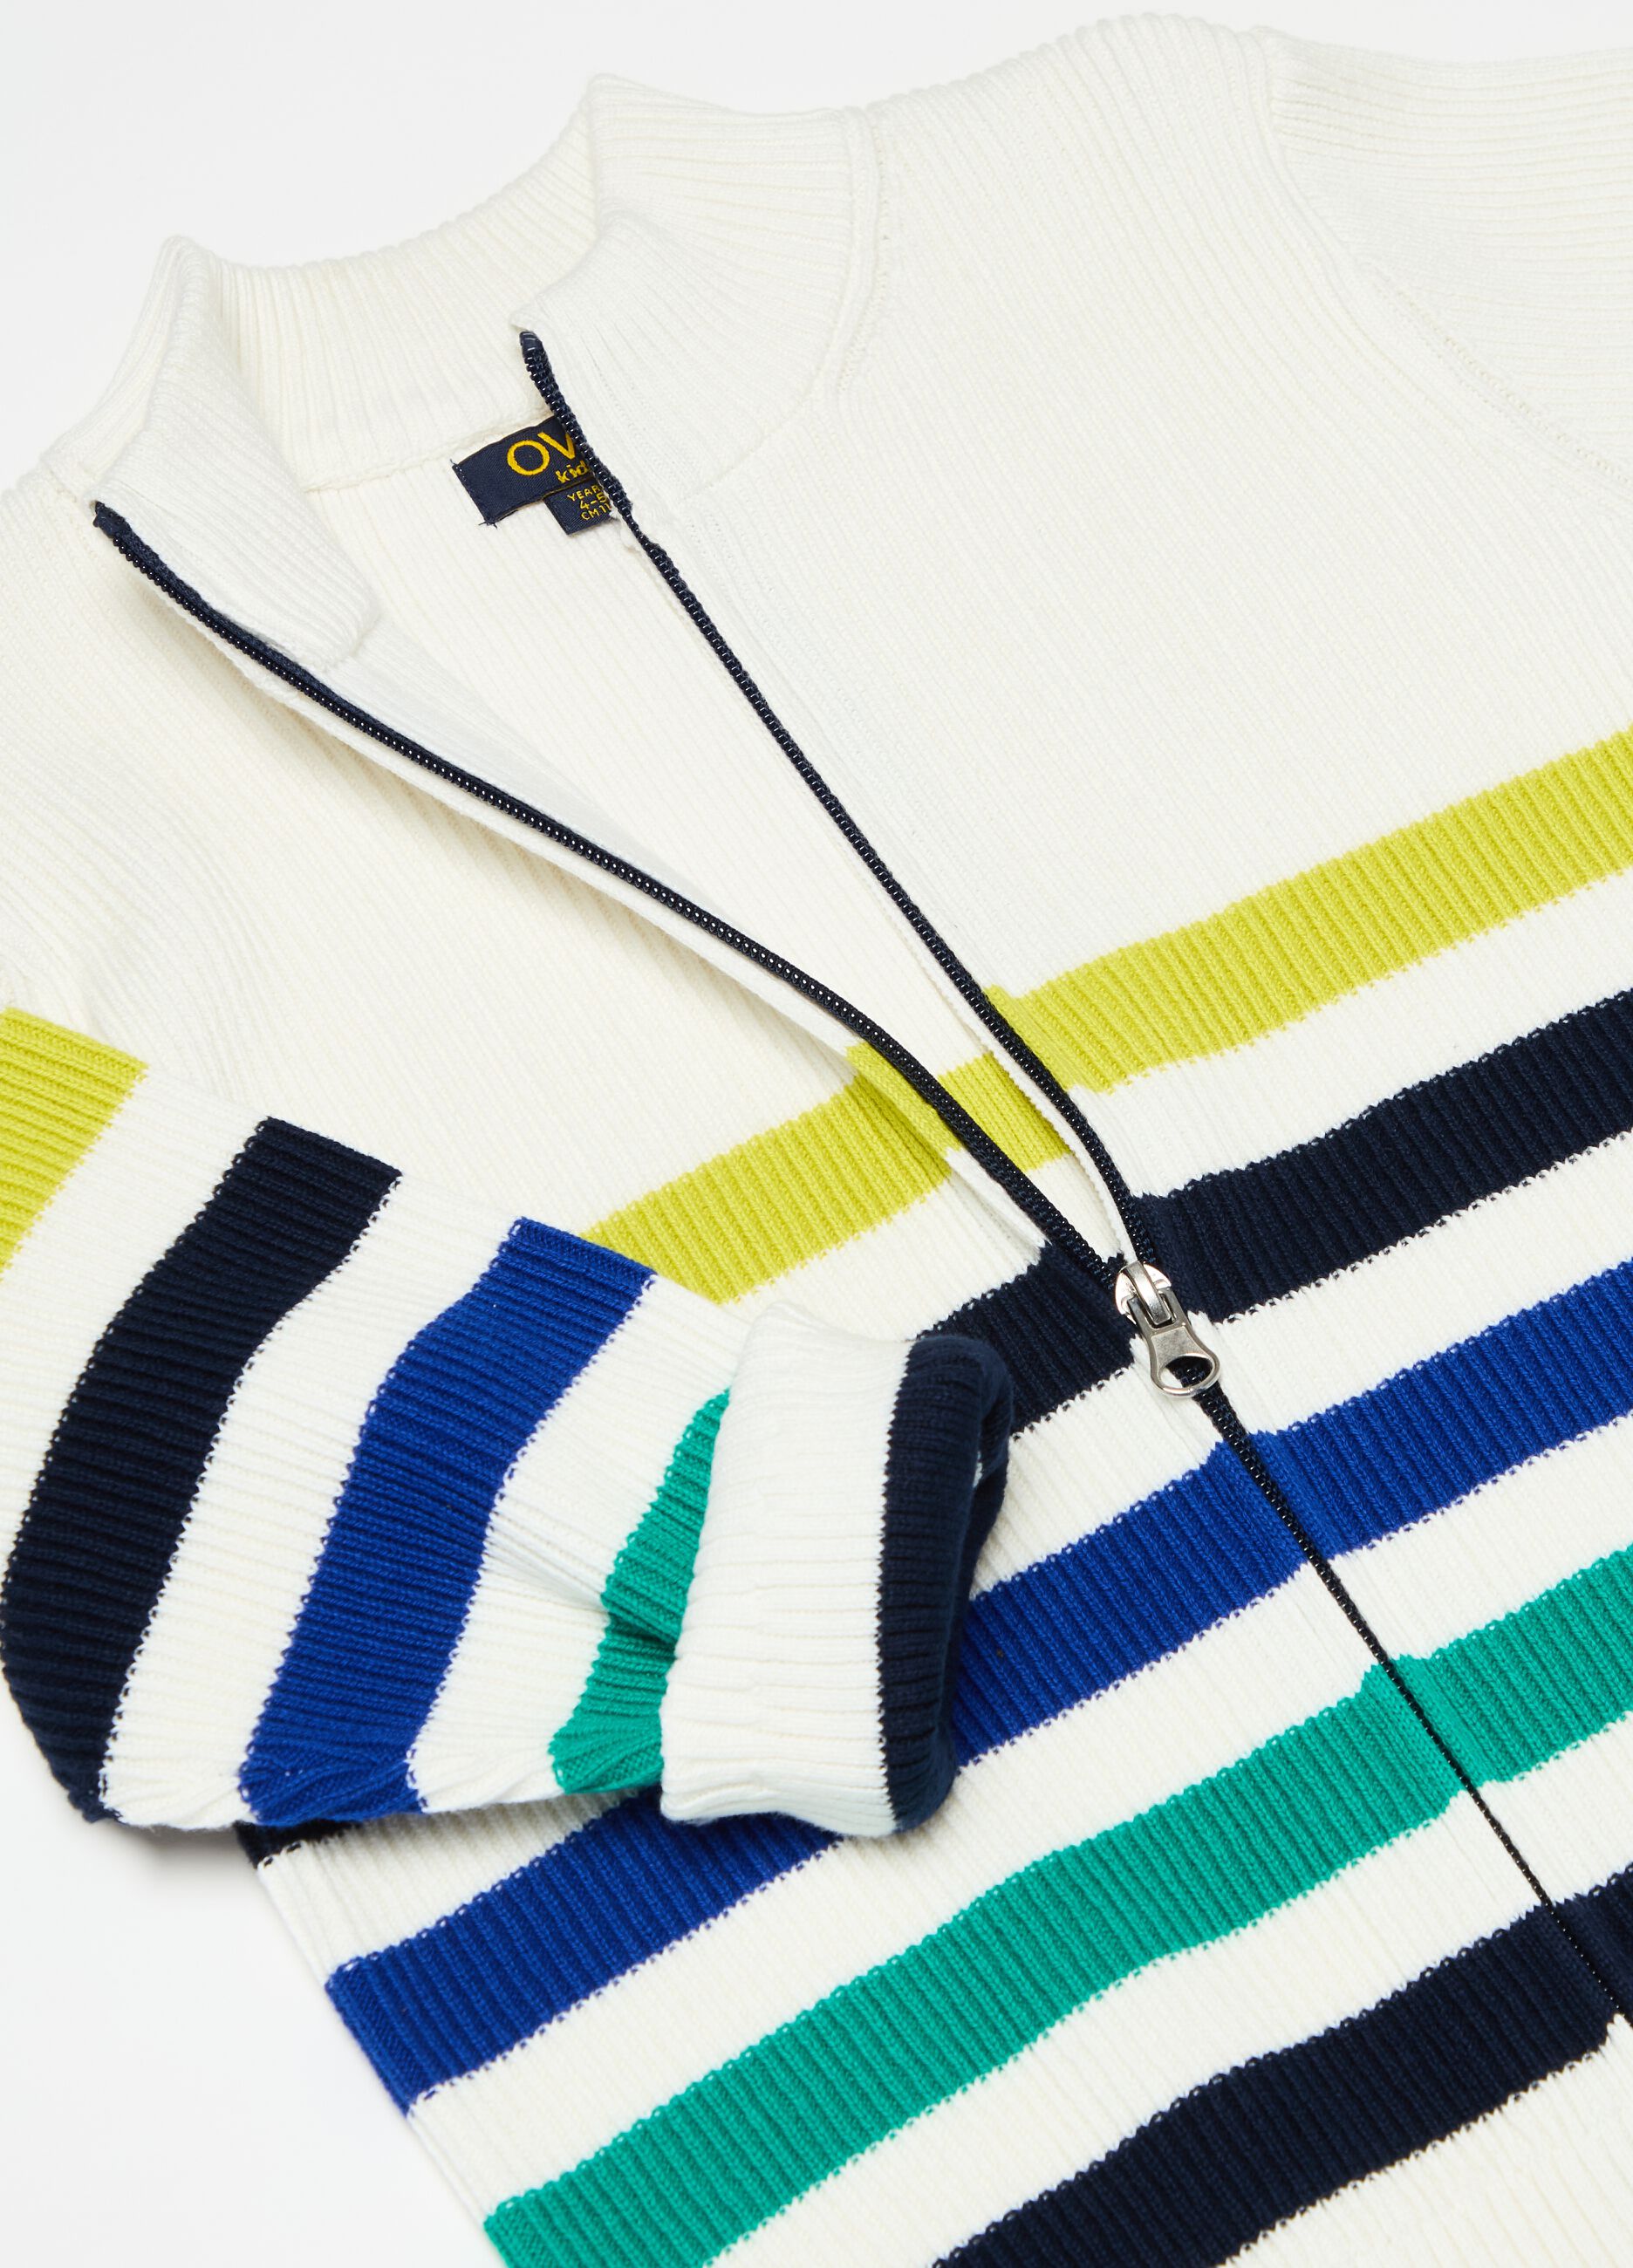 Full-zip cardigan with striped pattern